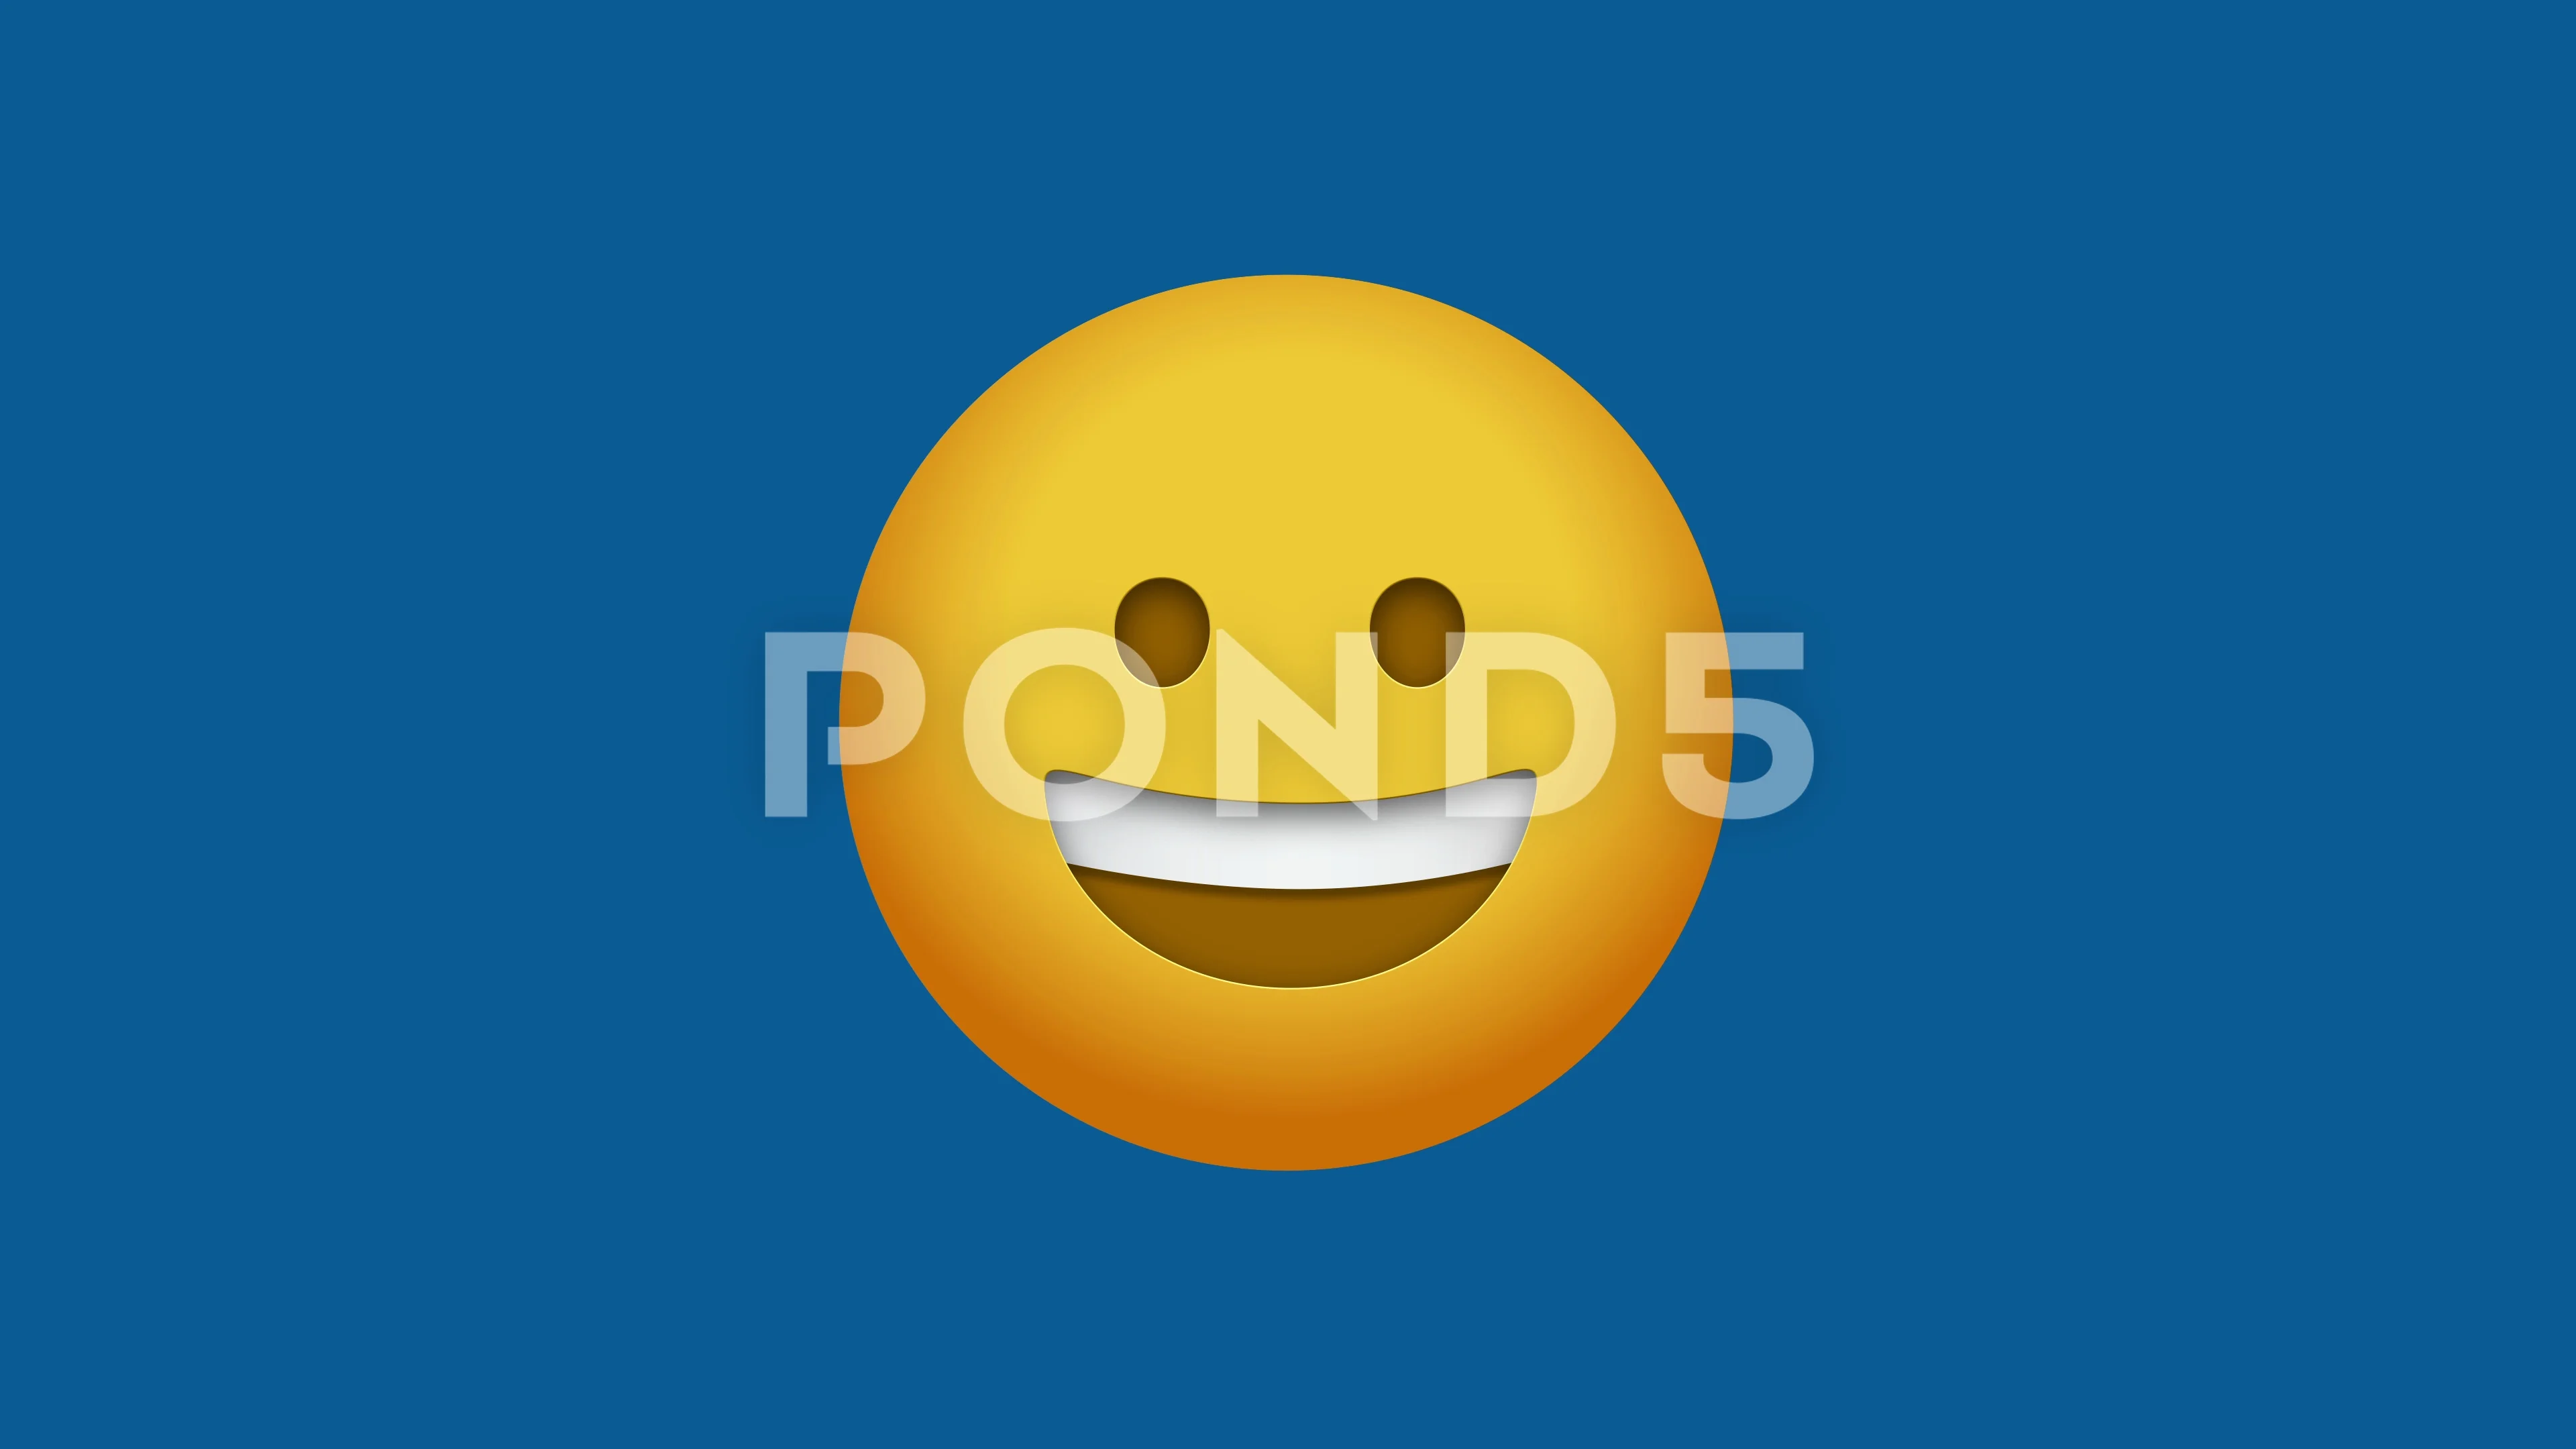 animated happy smiley face